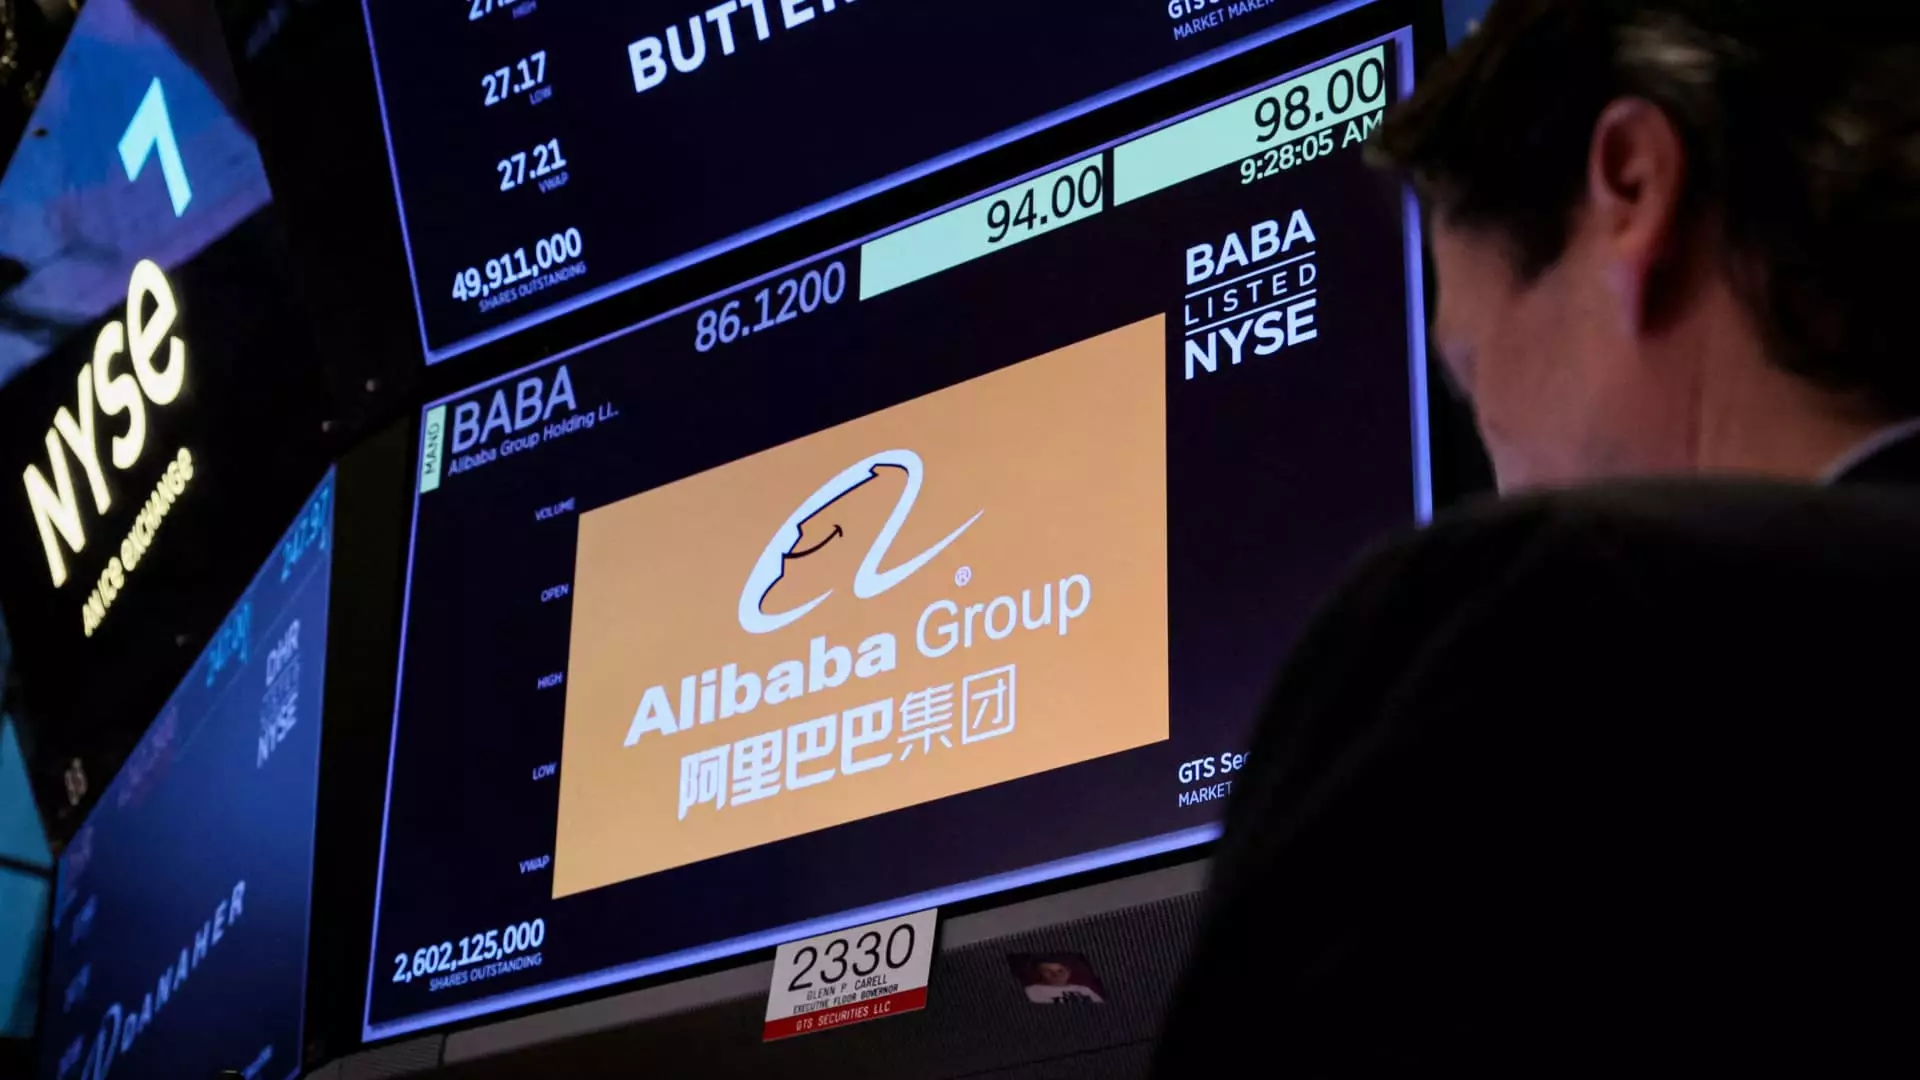 The Leadership Shake-up at Alibaba’s Taobao and Tmall: What Does it Mean for the Chinese E-commerce Giant?